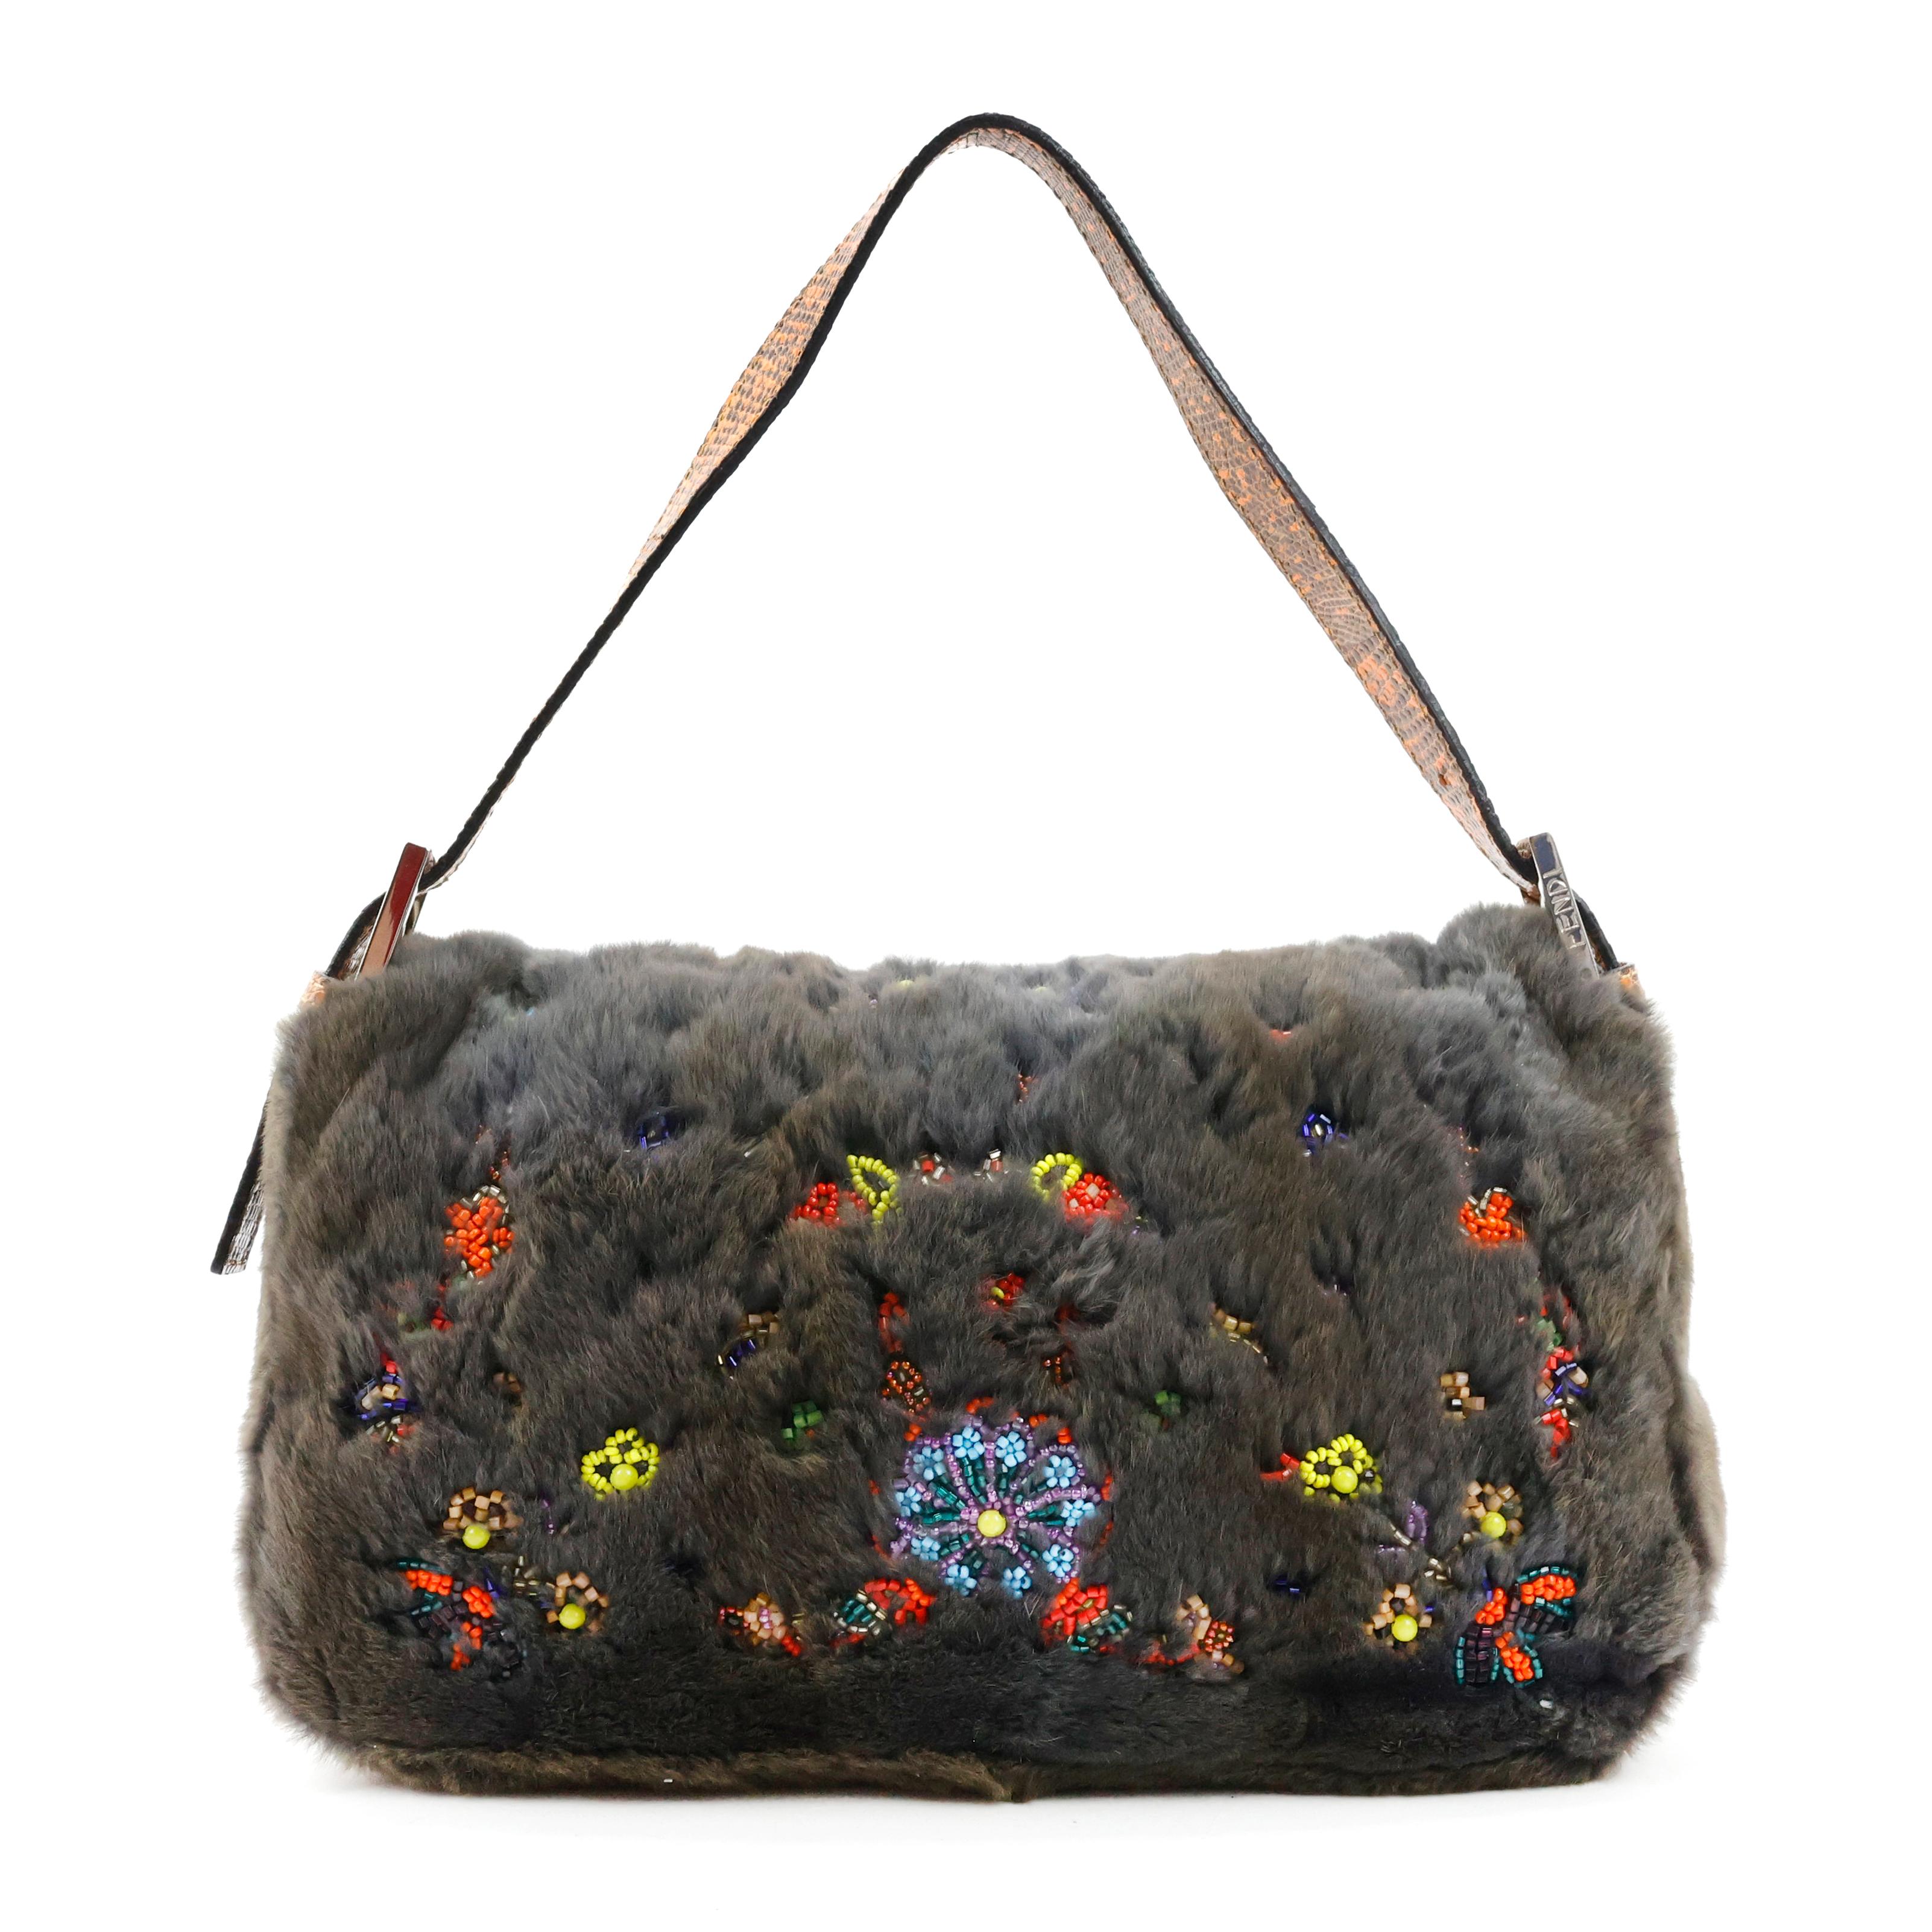 Rare Fendi baguette in fur color grey + python leather color orange, with embroidered multicolored mini stones, internal in silk color orange, silver hardware. Collector piece.

Condition:
Really good, to note: slight scratches on front